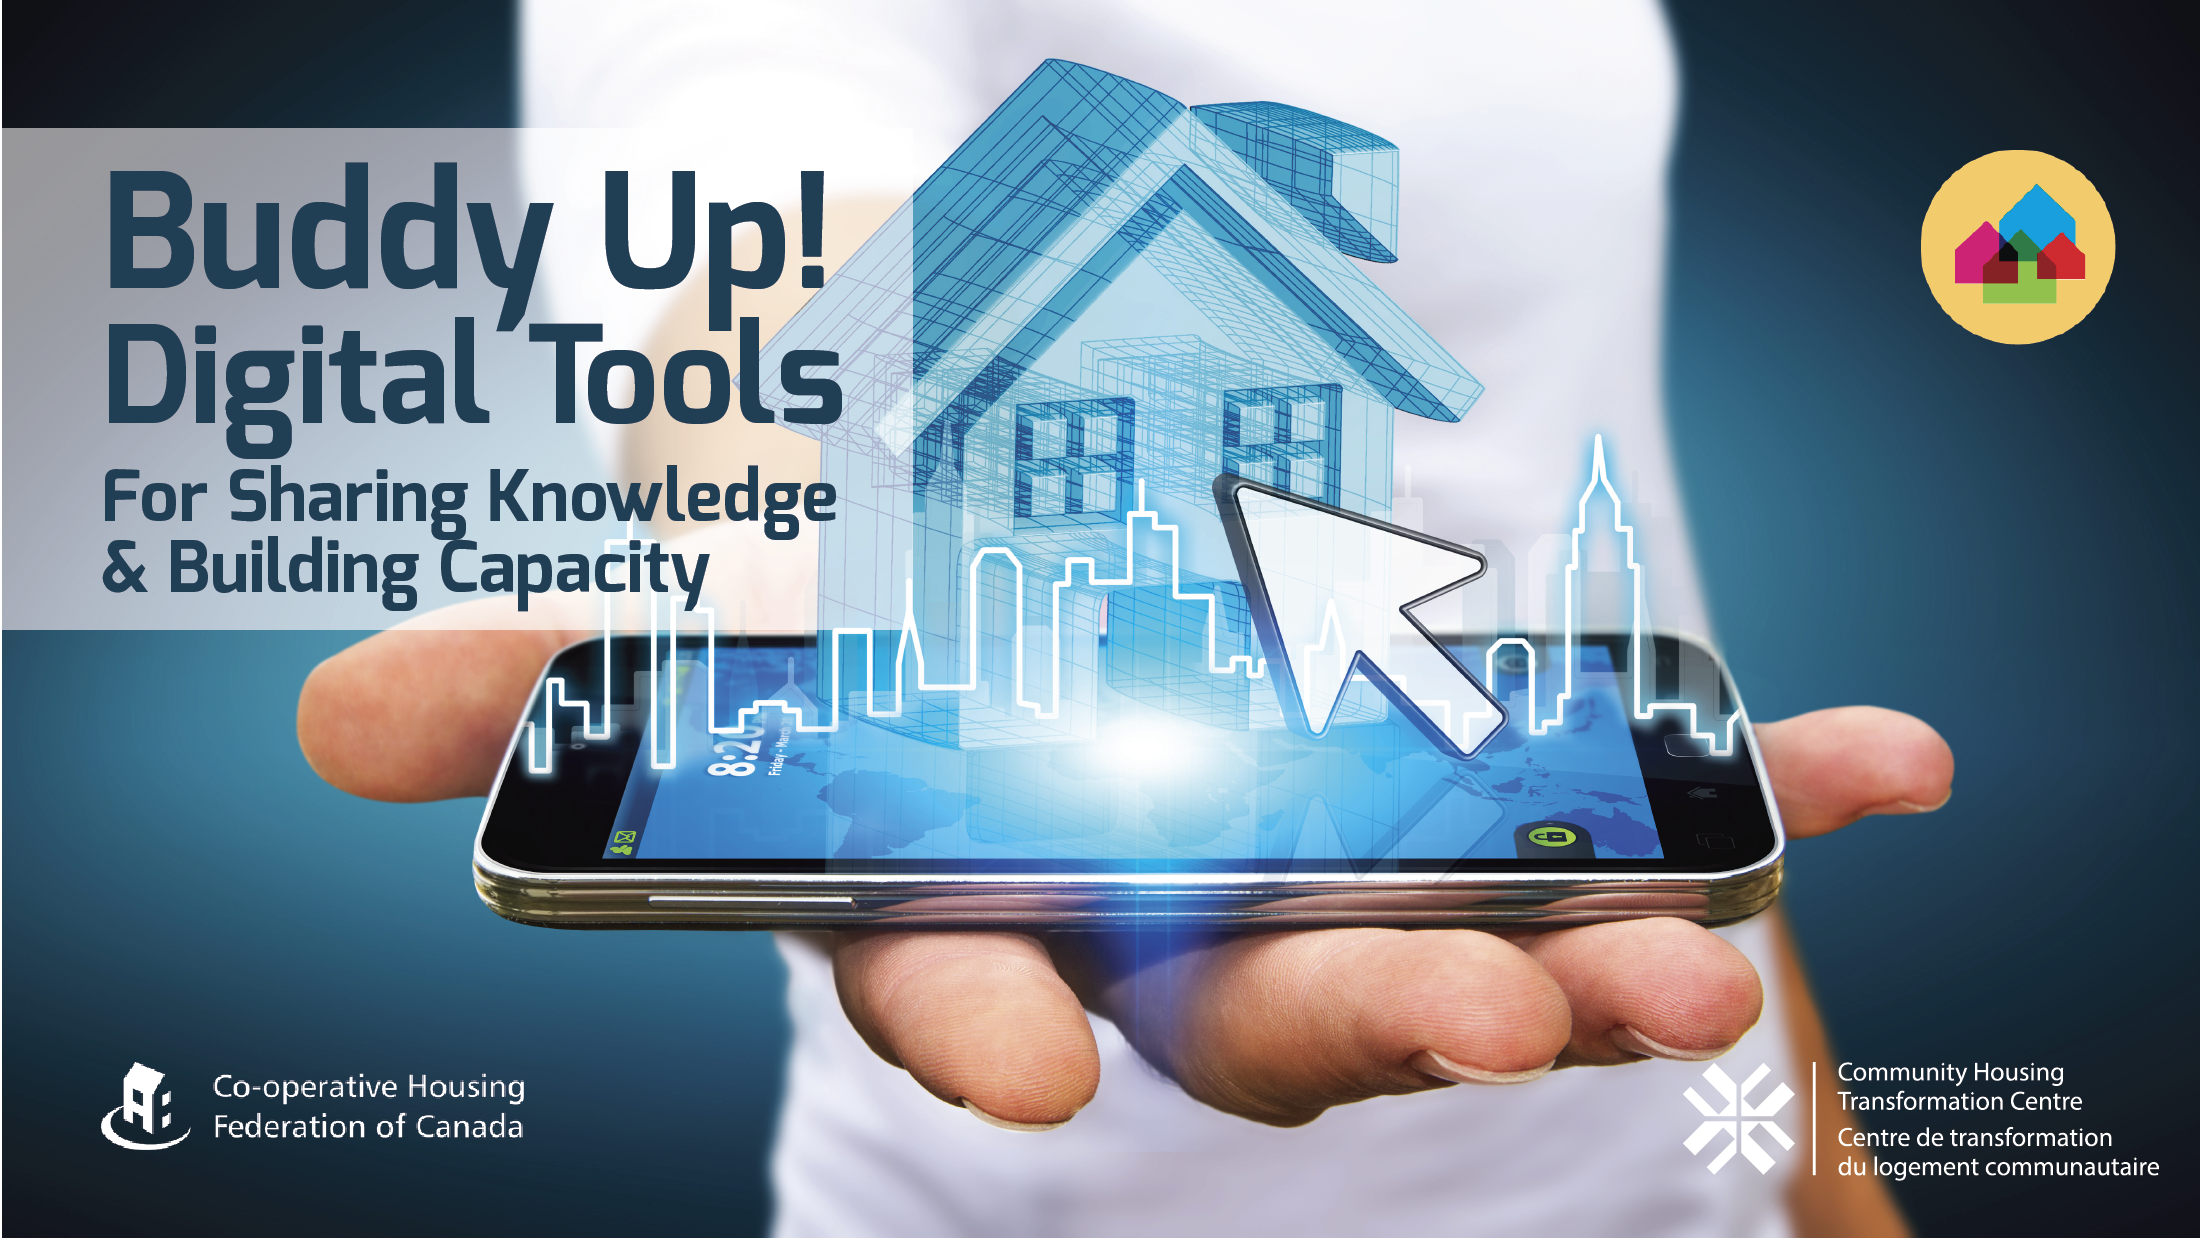 Buddy Up! — Digital Tools for Sharing Knowledge and Building Capacity among Members in Housing Cooperatives